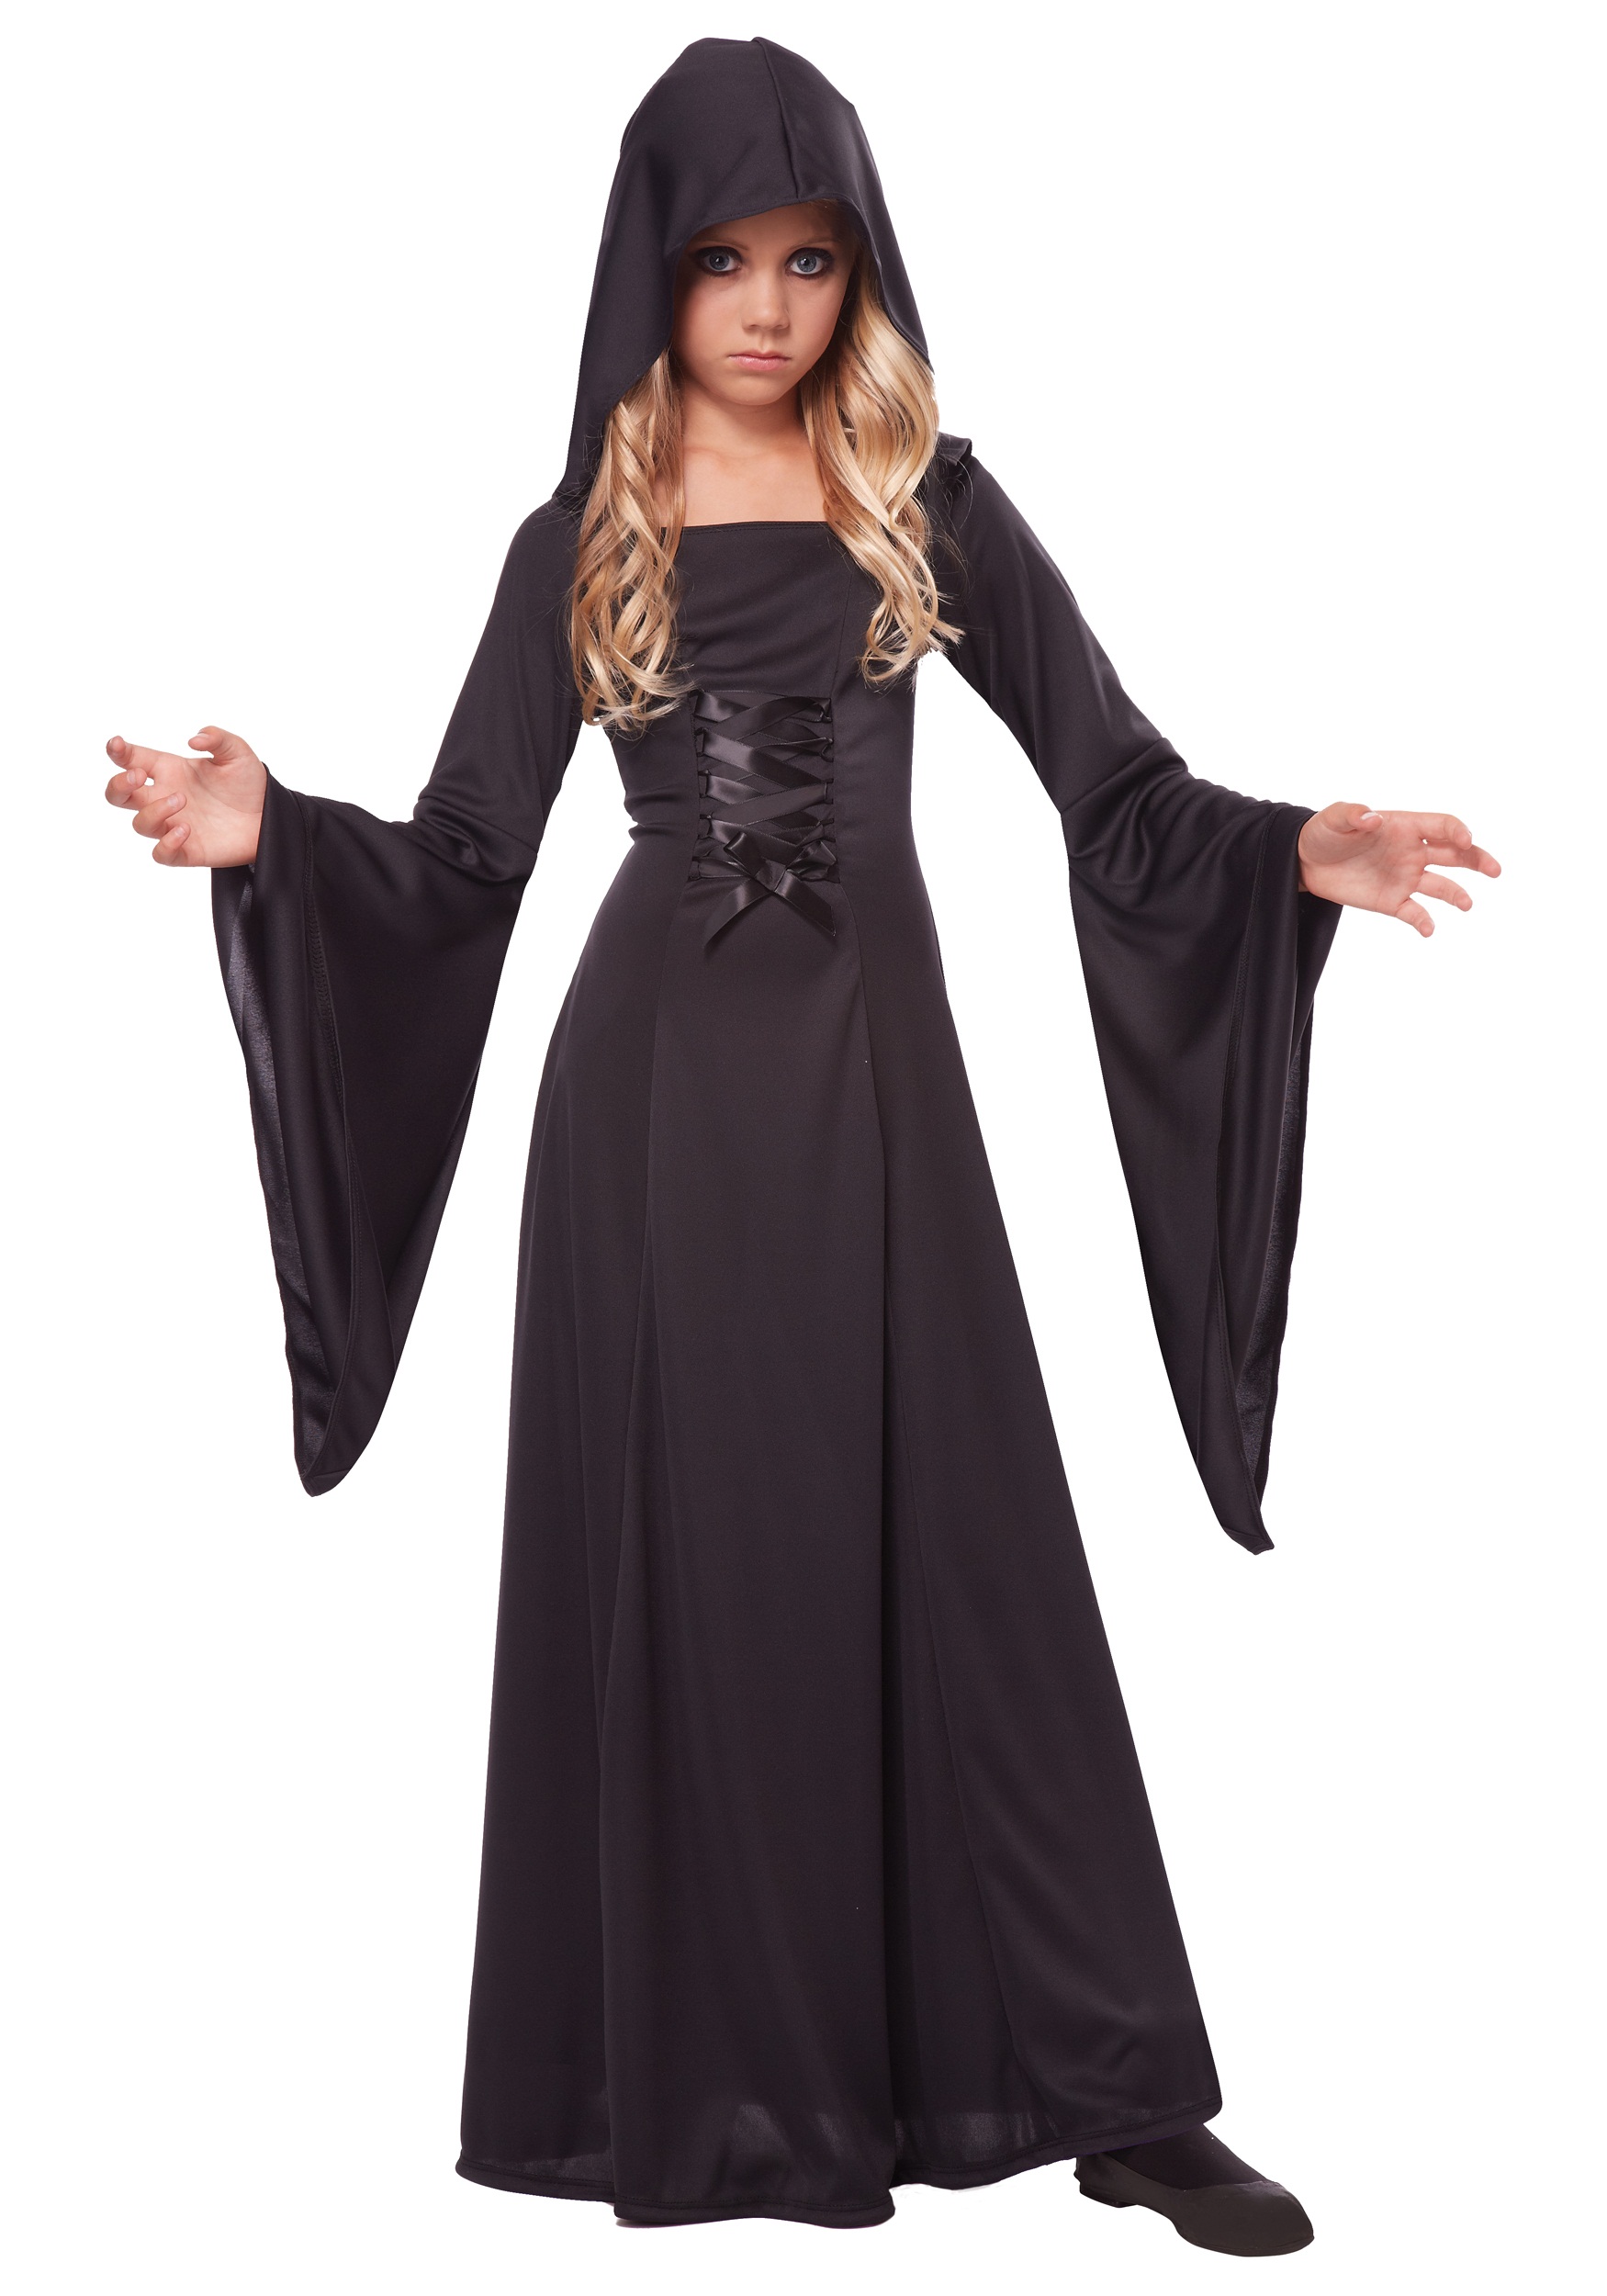 https://images.halloweencostumes.ca/products/23045/1-1/black-hooded-robe.jpg